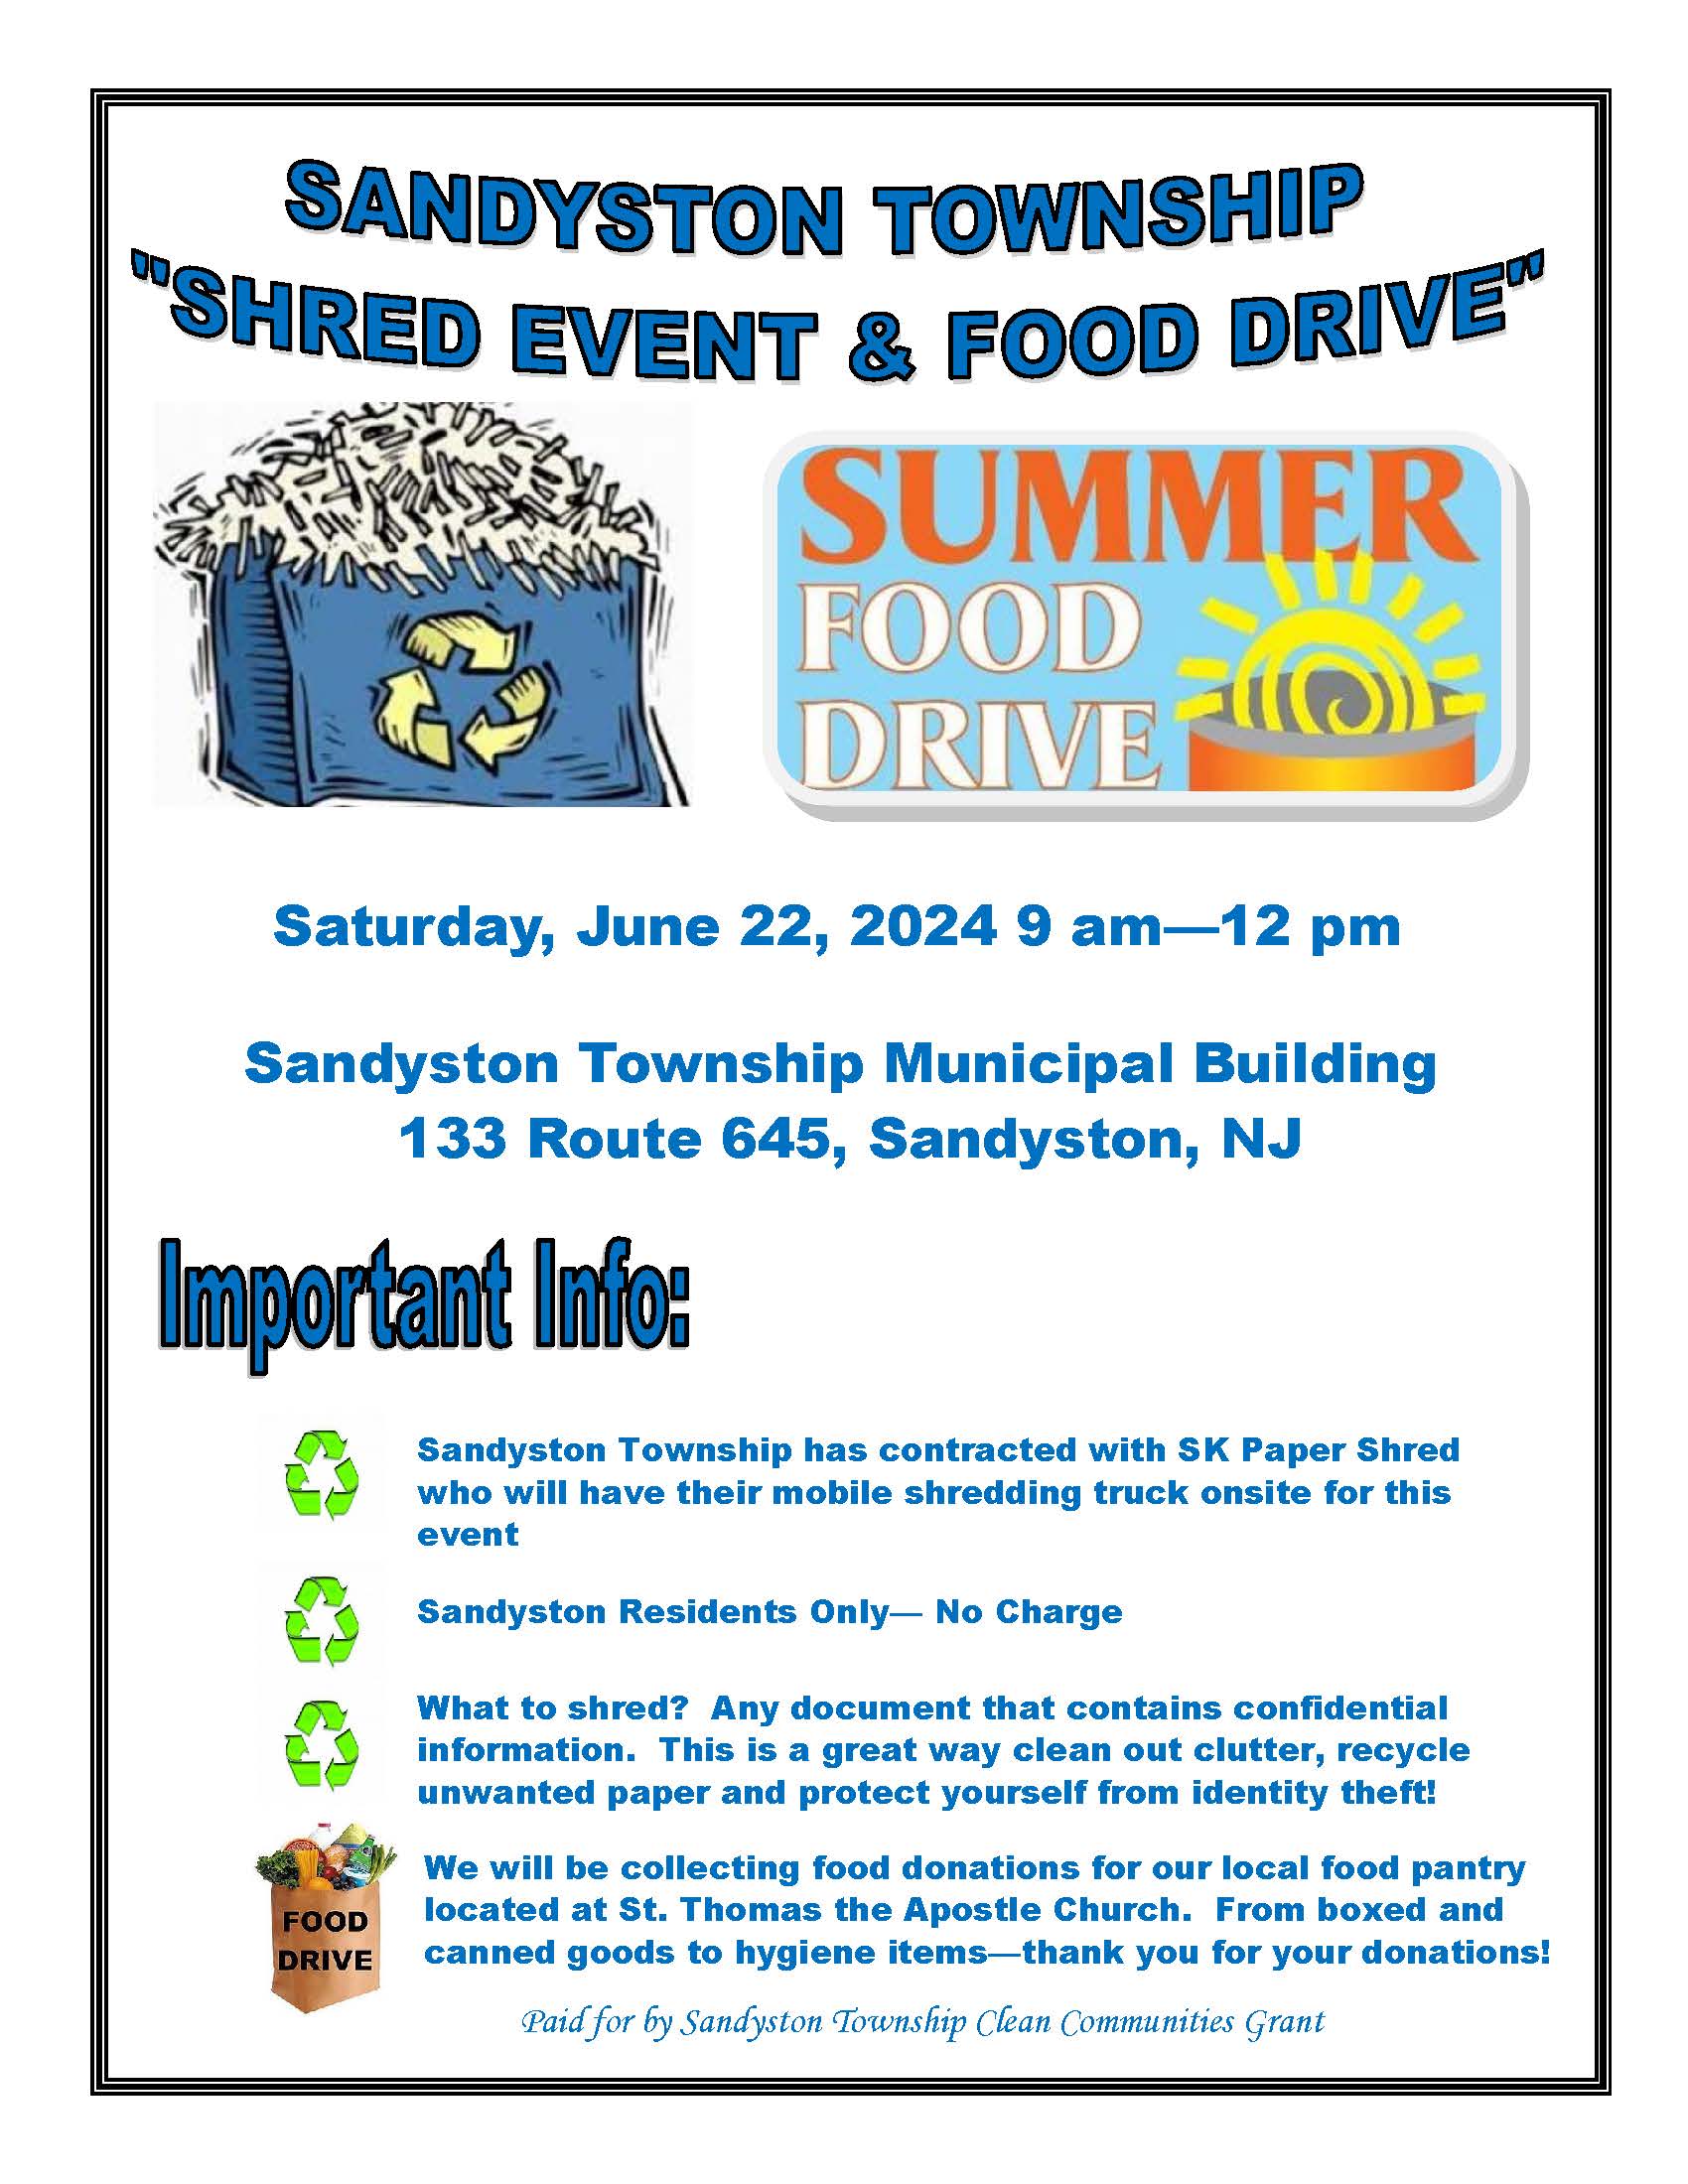 shred event 2024 june